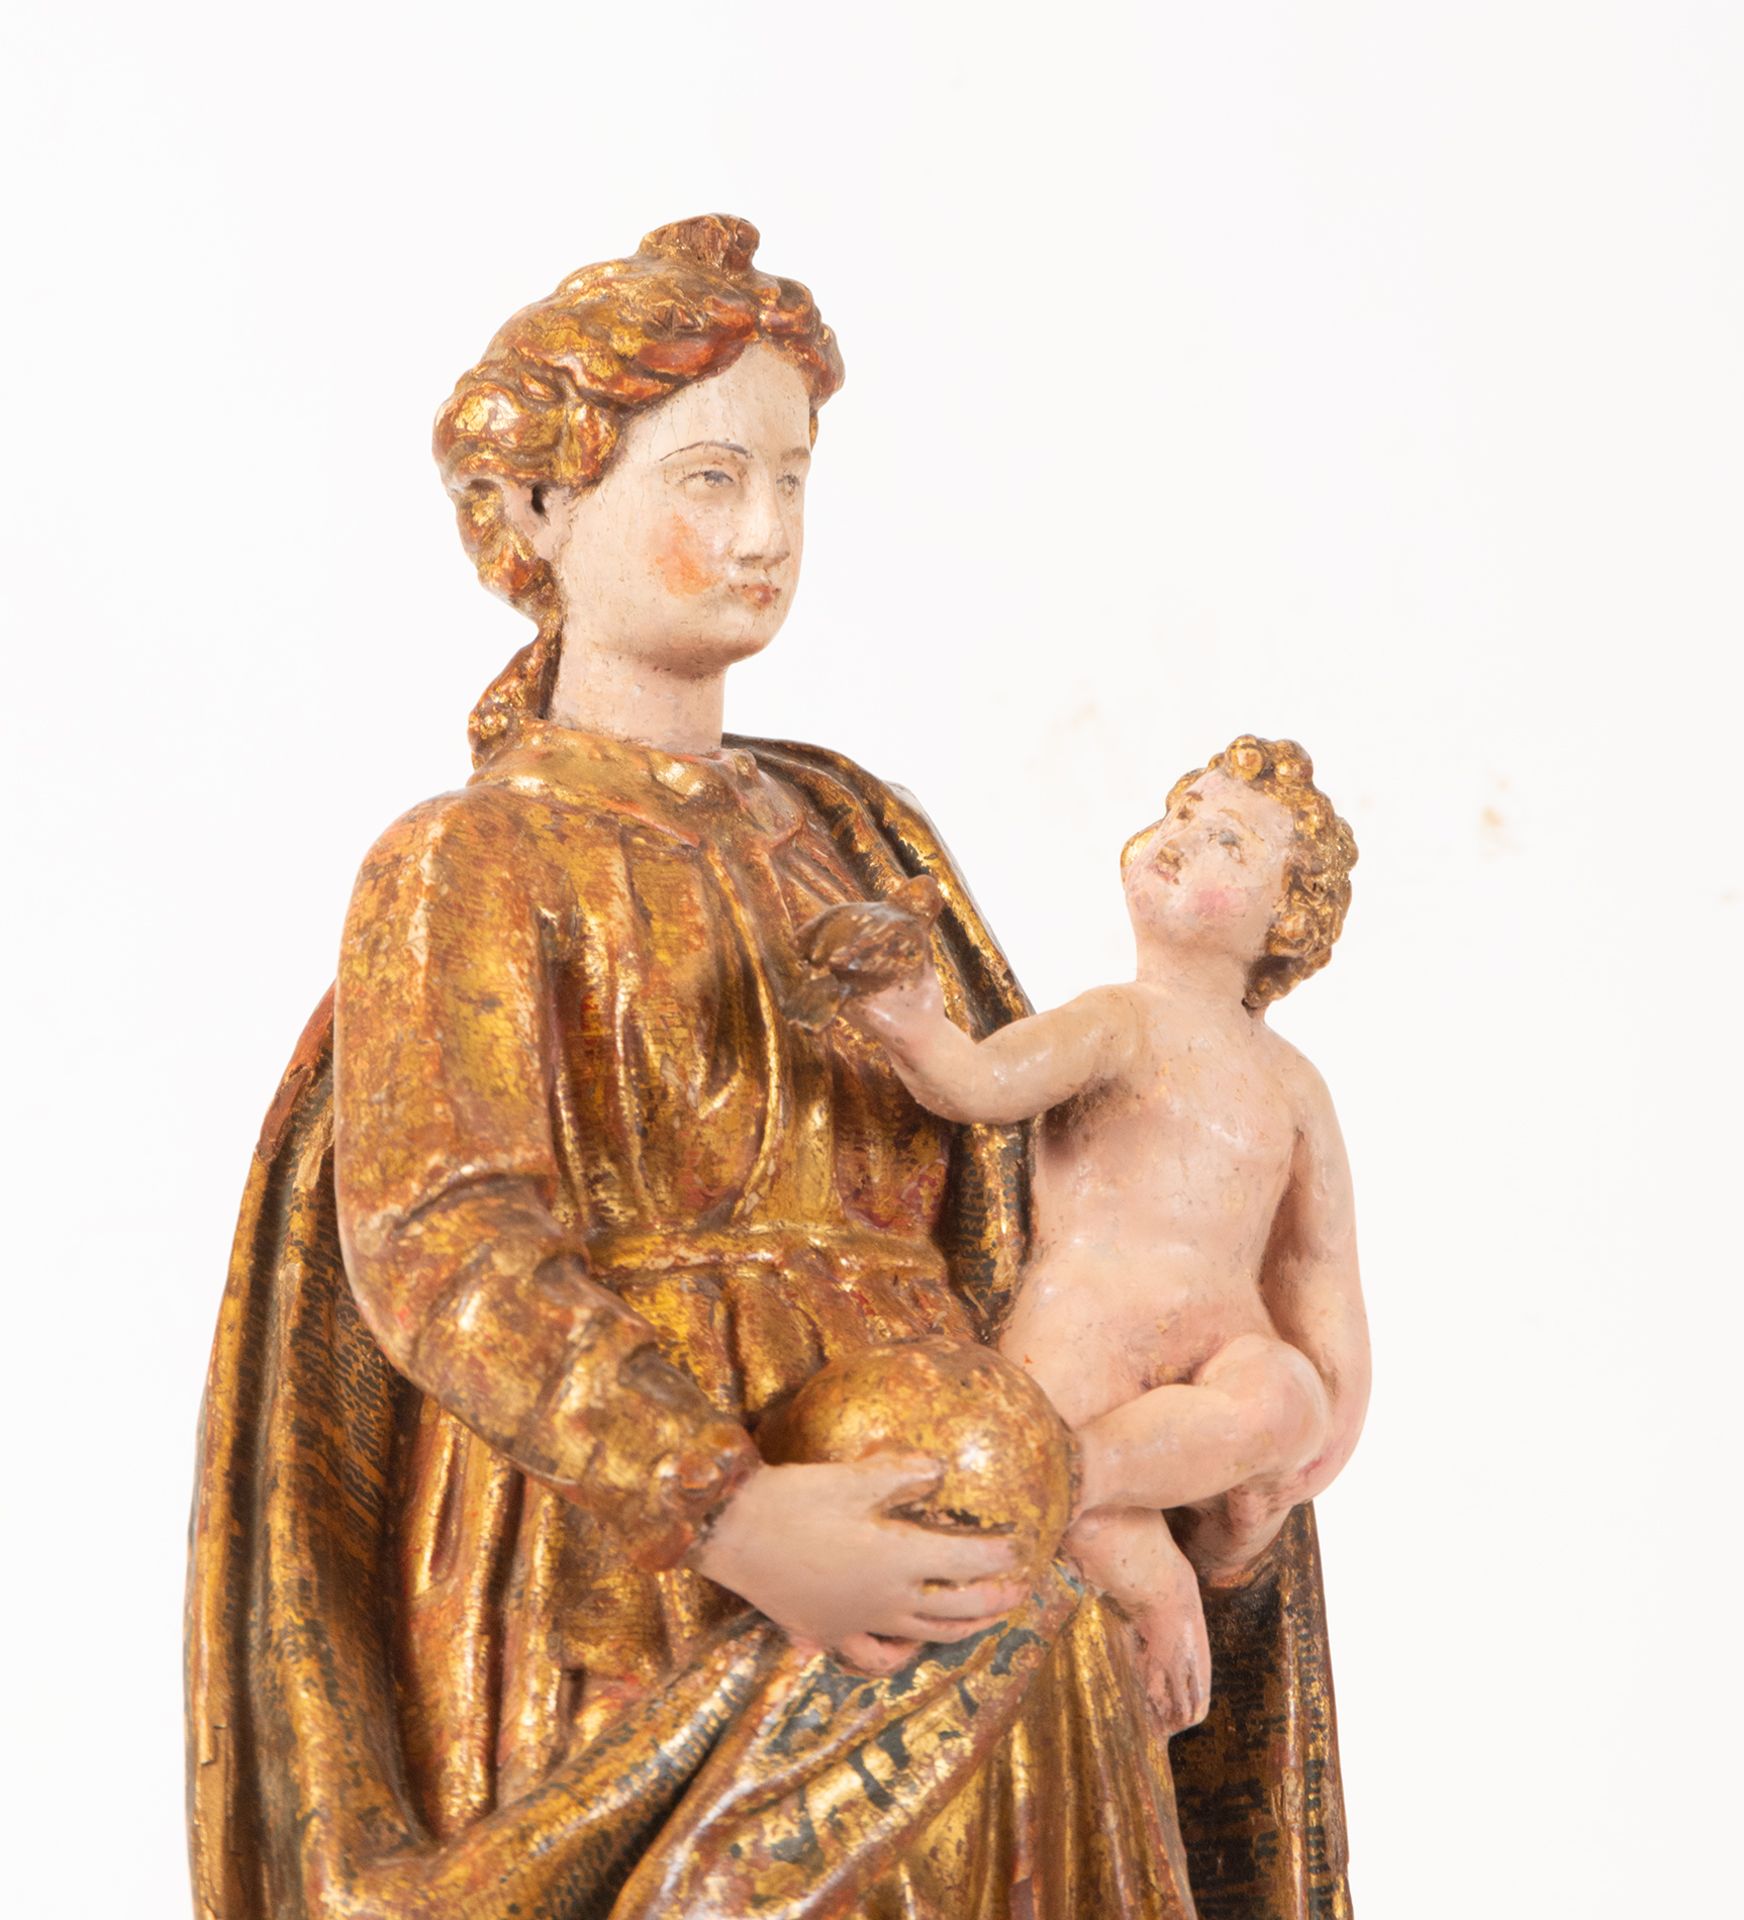 Important Virgin with Child in her arms, Hispano-Flemish school of the 16th century - Image 7 of 11